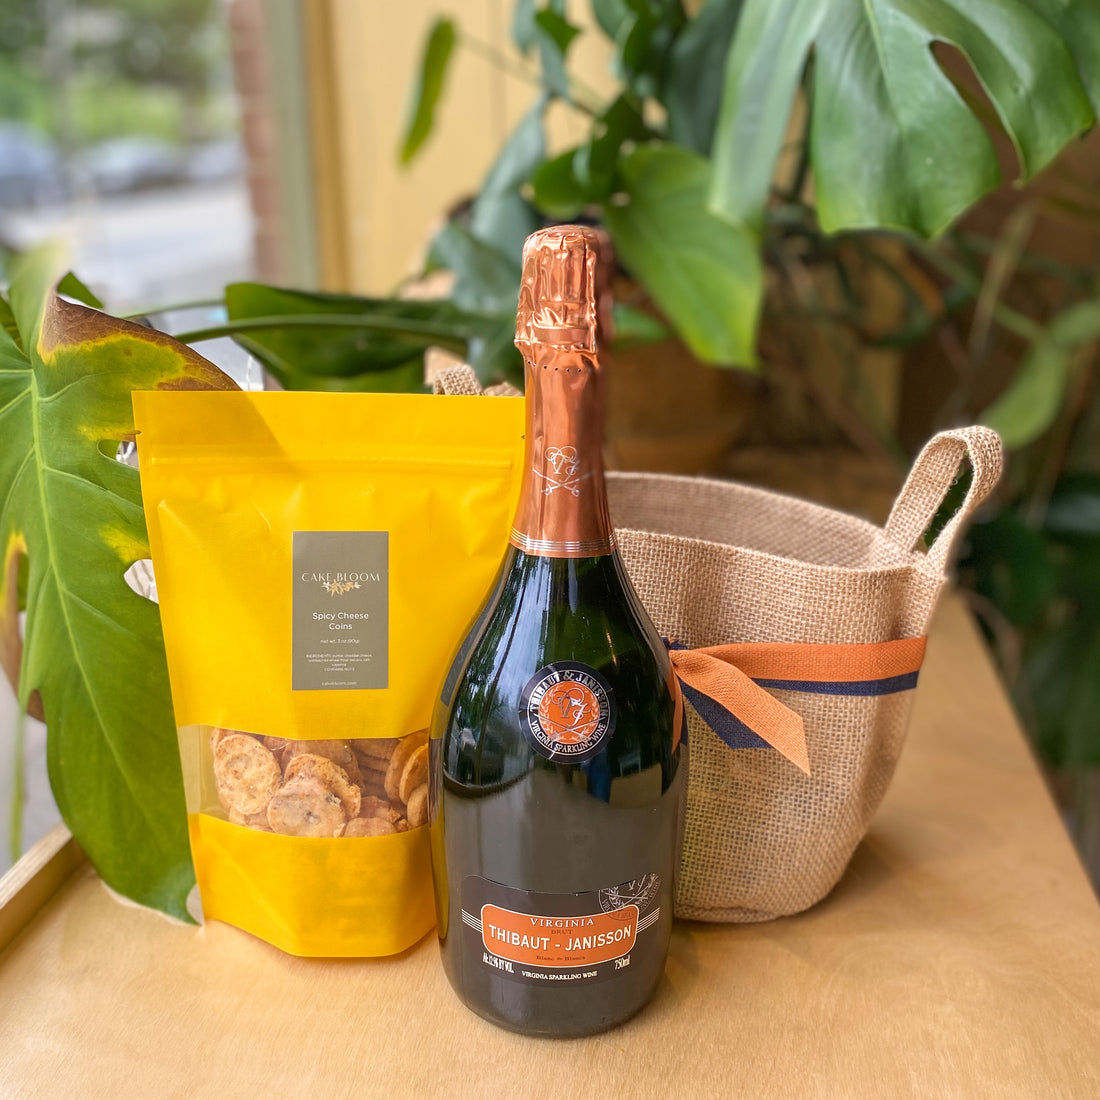 A bottle of Thibaut-Janisson, a bag of spicy cheese coins, and an empty tote bag tied with a blue and orange ribbon.